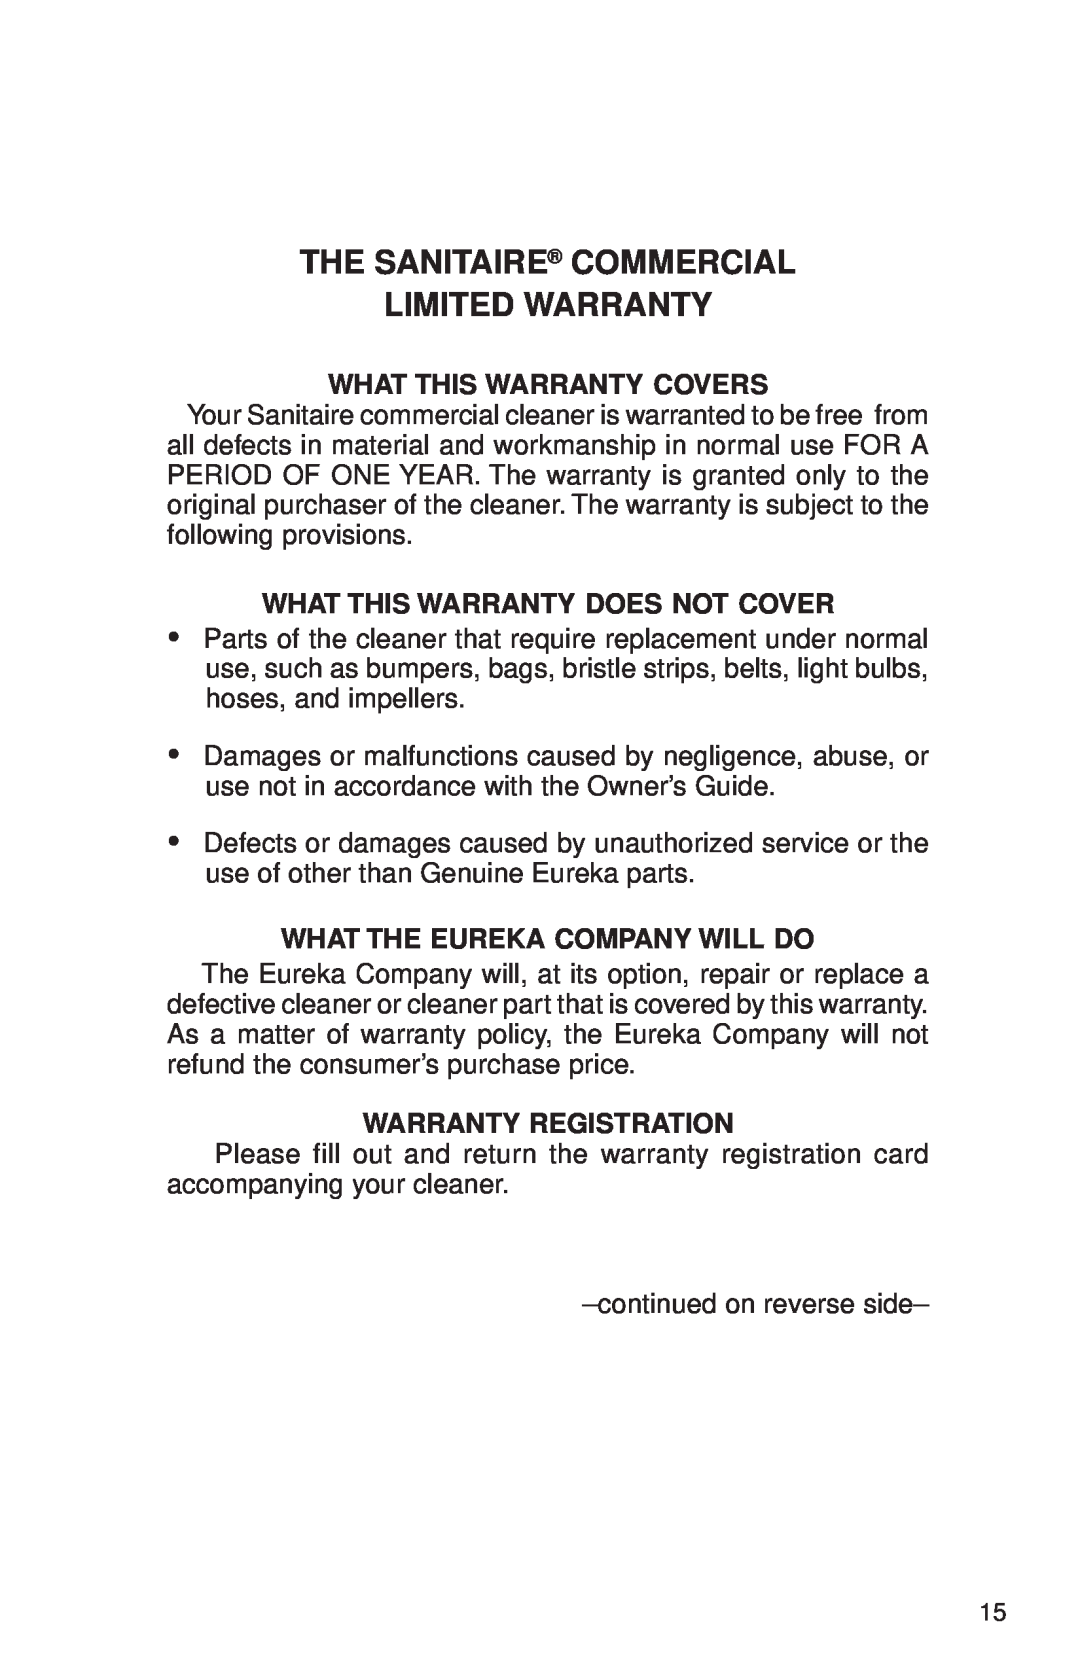 Sanitaire SC899 The Sanitaire Commercial Limited Warranty, What This Warranty Covers, What This Warranty Does Not Cover 